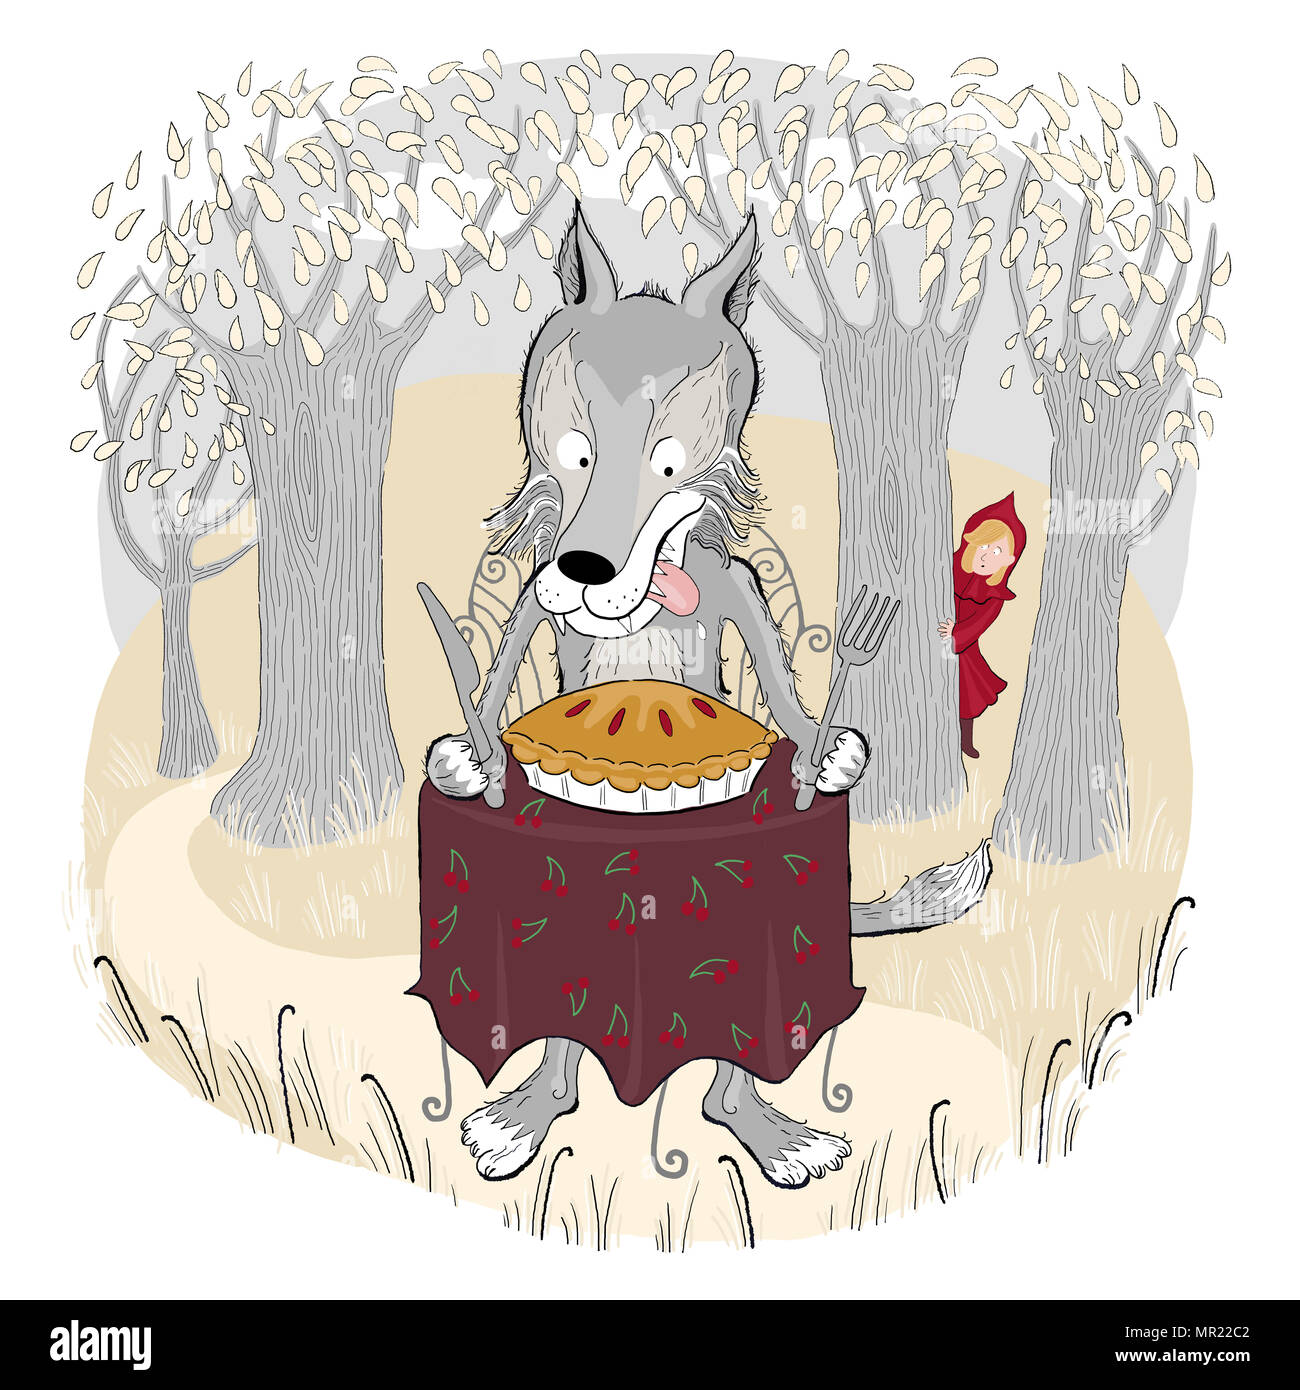 An Illustration Of Little Red Riding Hood Hiding Behind A Tree And The Big Bad Wolf Eating A Cherry Pie In The Woods Stock Photo Alamy